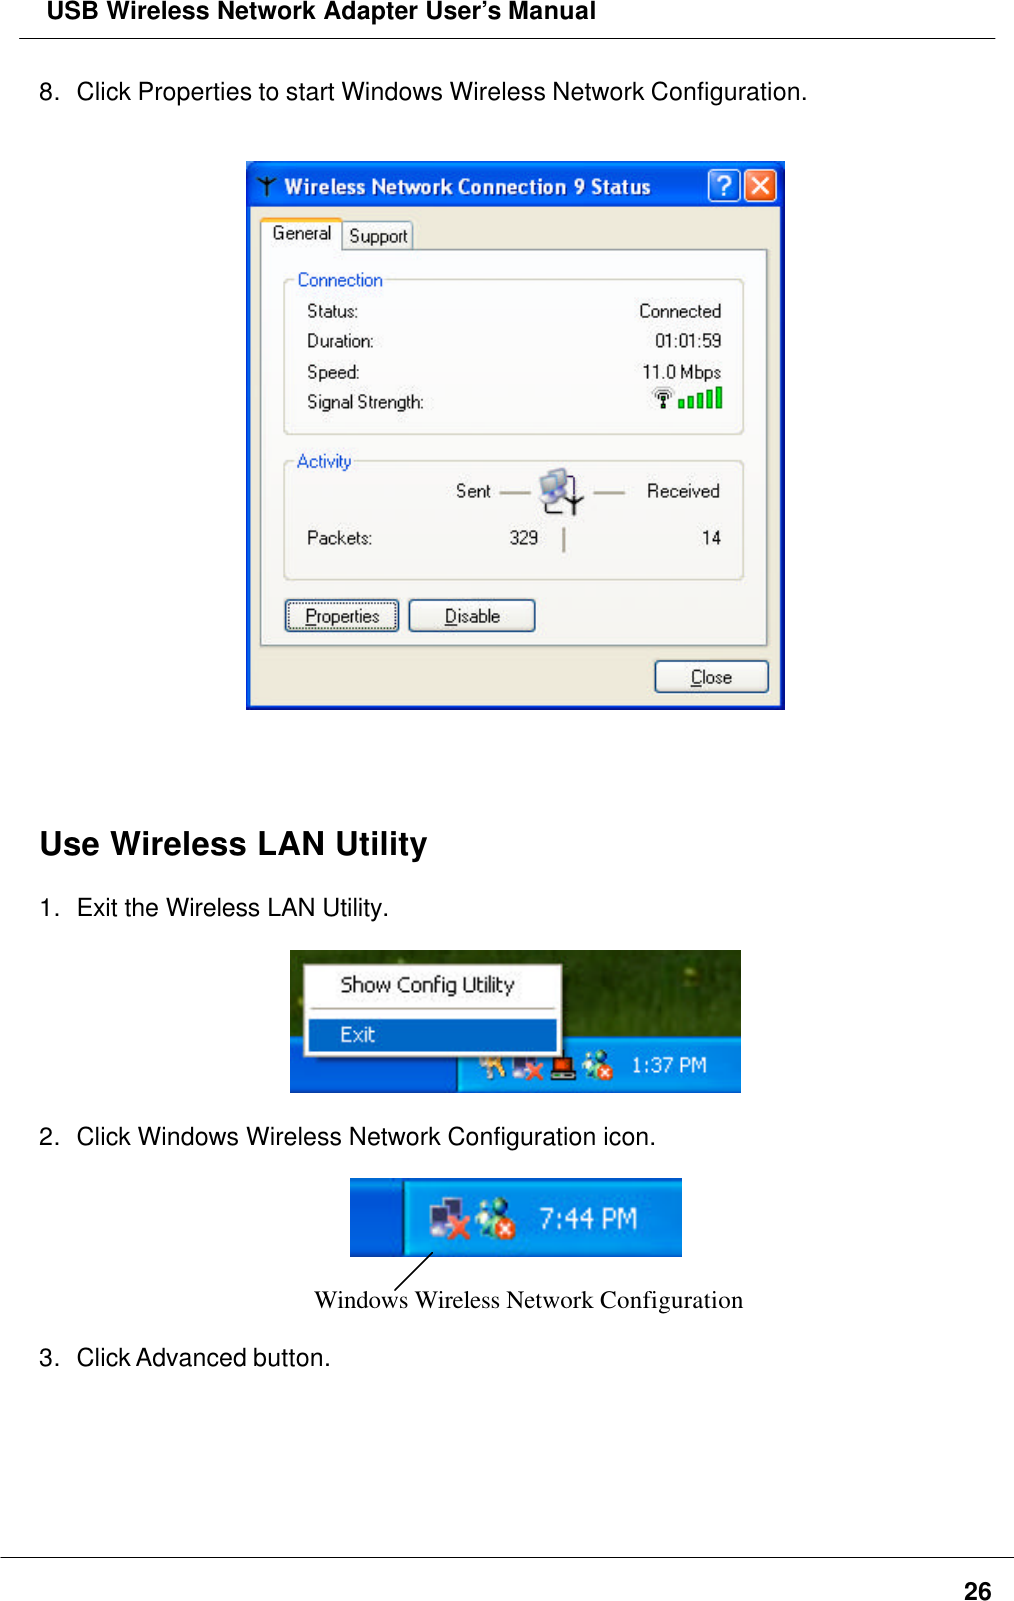  USB Wireless Network Adapter User’s Manual268. Click Properties to start Windows Wireless Network Configuration.Use Wireless LAN Utility1. Exit the Wireless LAN Utility.2. Click Windows Wireless Network Configuration icon.Windows Wireless Network Configuration3. Click Advanced button.